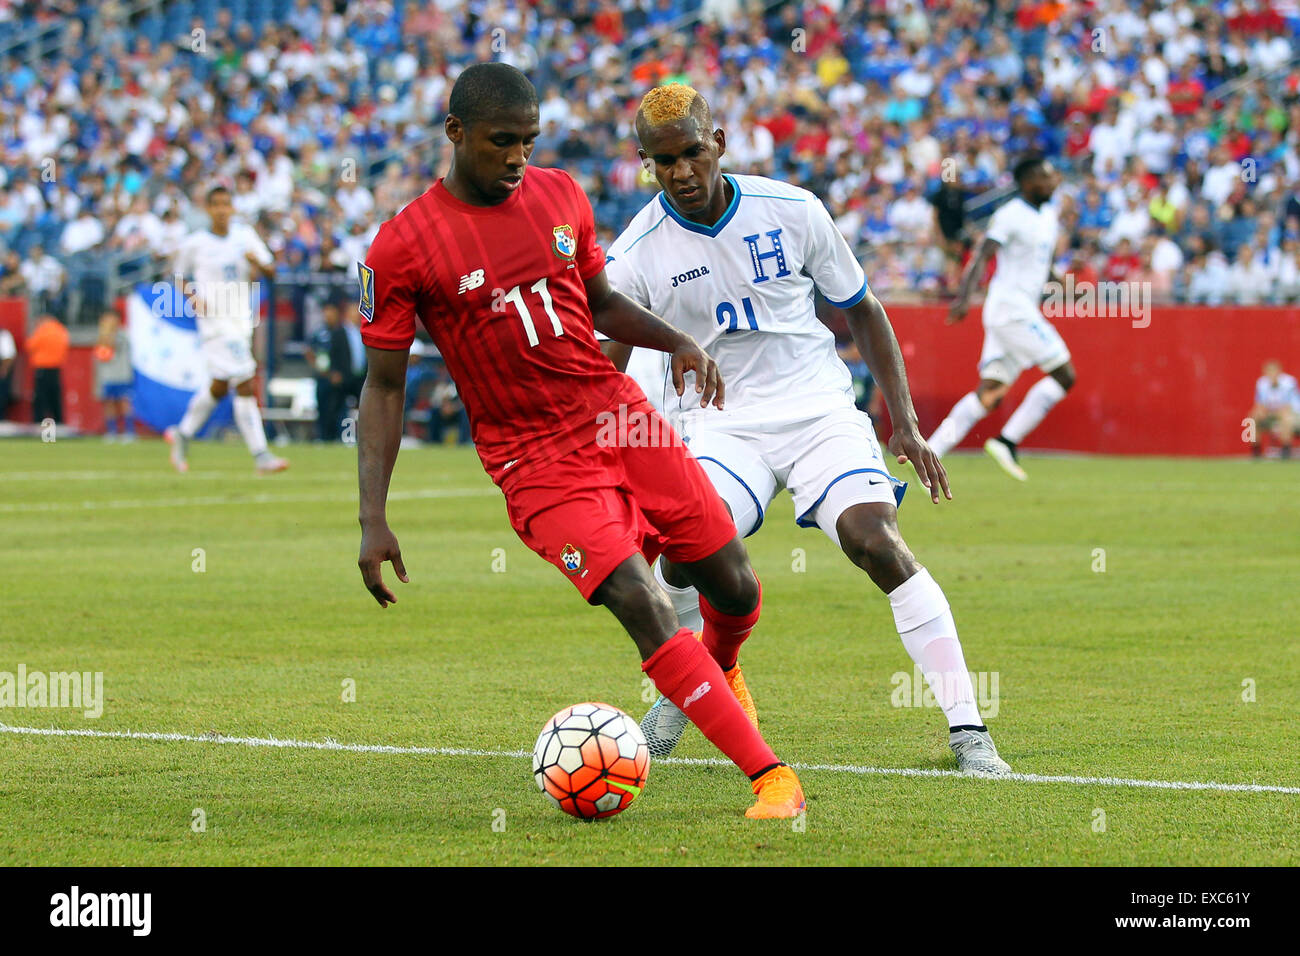 July 10, 2015; Foxborough, MA, USA; Panama midfielder Armando Cooper (11) and Honduras defender Brayan Beckeles (21) in action during the CONCACAF Gold Cup match between Panama and Honduras at Gillette Stadium. The match ended in a 1-1 tie. Anthony Nesmith/Cal Sport Media Stock Photo